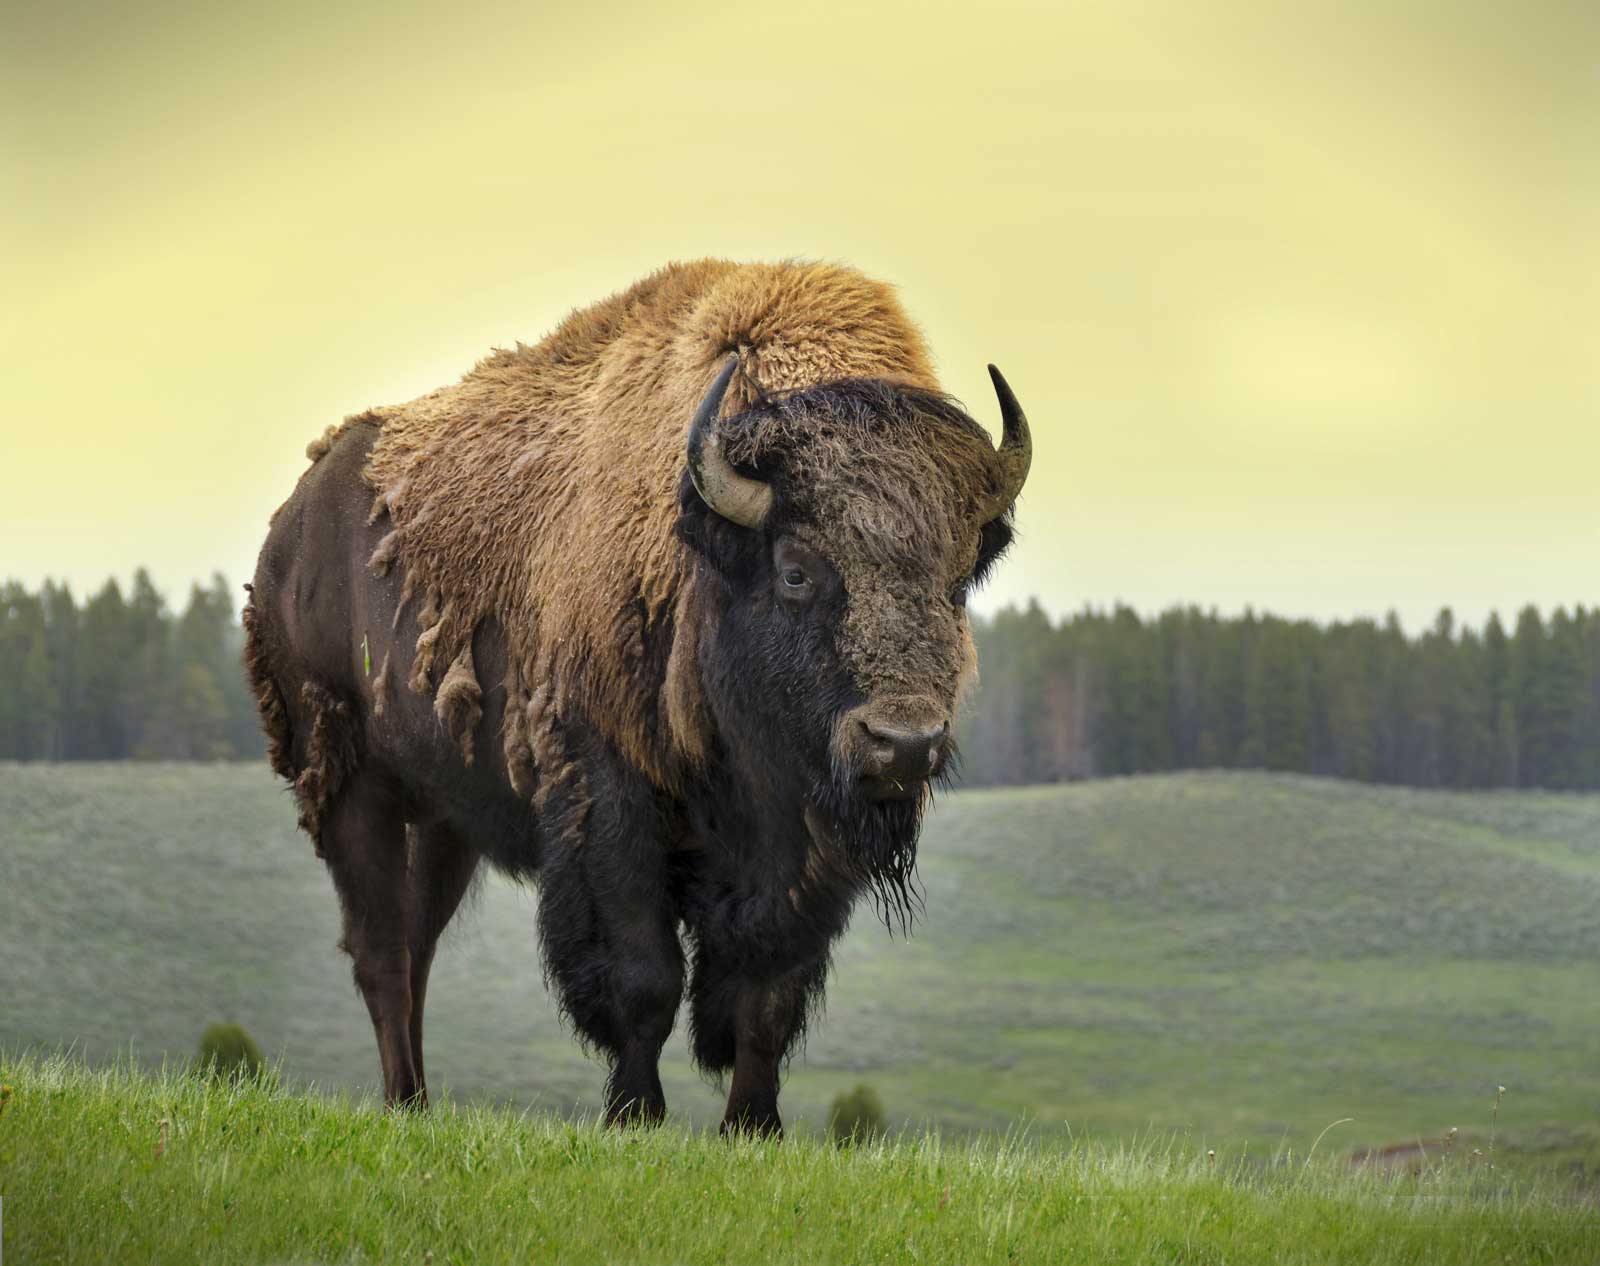 Stock image of Bison I chose to use